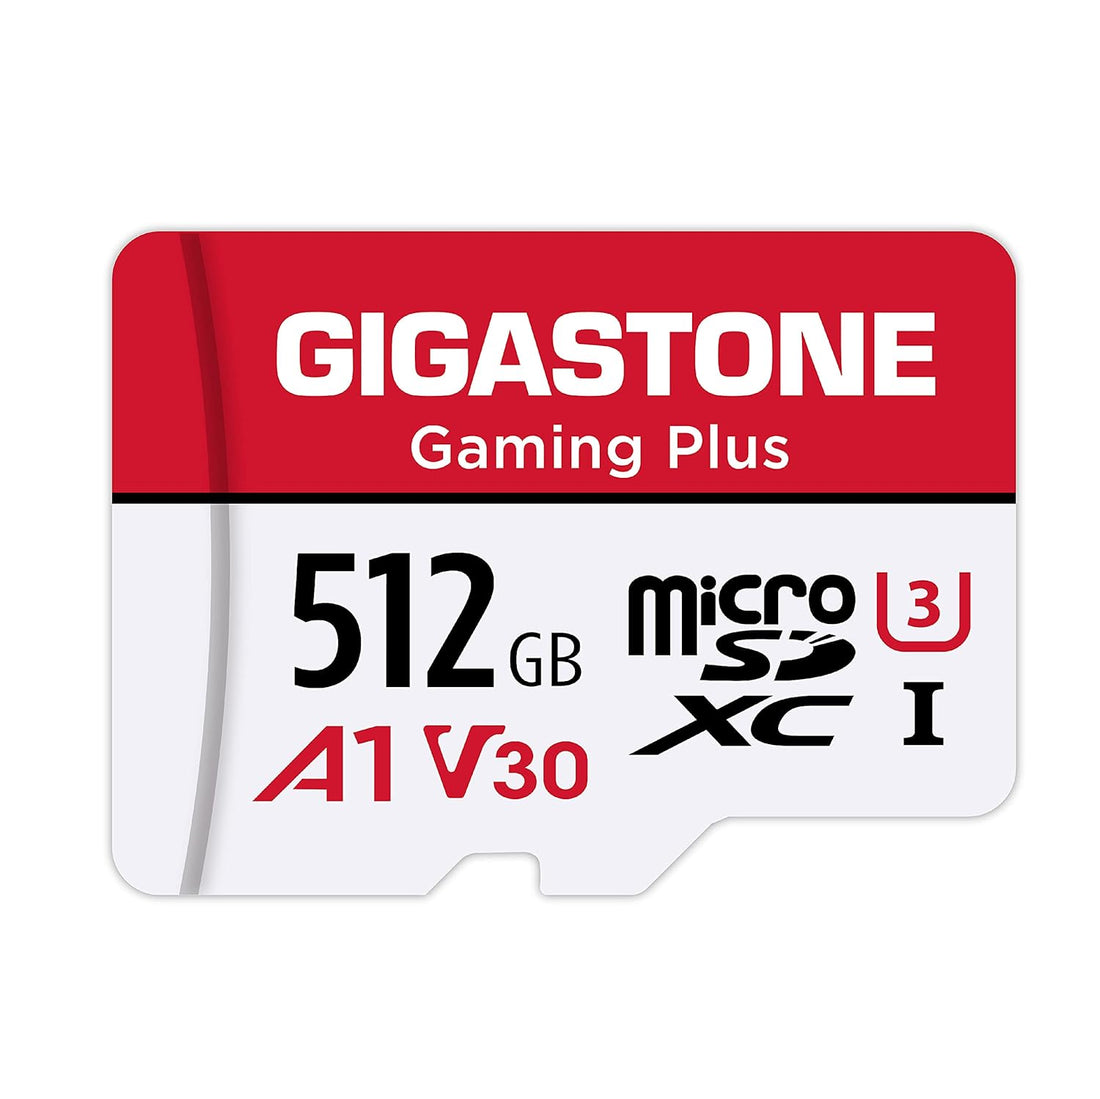 Gigastone 512Gb Micro Sd Card, Gaming Plus, Microsdxc Card For Nintendo-Switch, Wyze, Gopro, Dash Cam, Security Cam, 4K Video Recording, Uhs-I A1 U3 V30 C10, Up To 100Mb/S, With Adapter